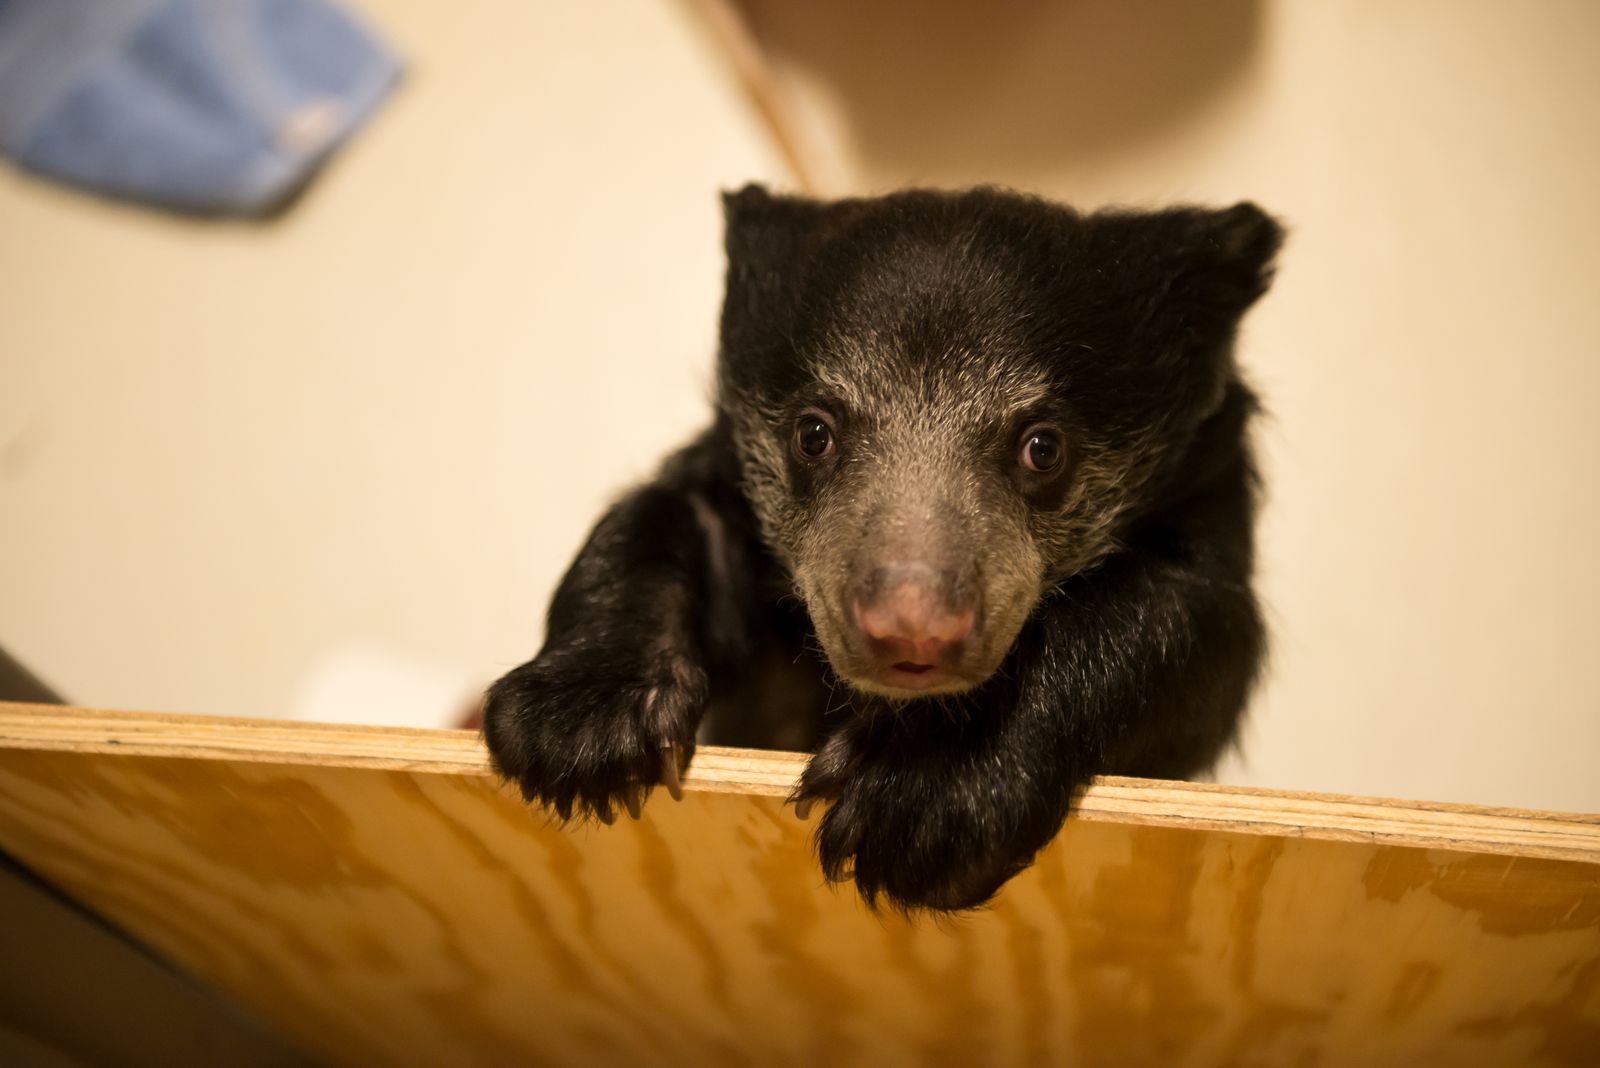 Zoo Keepers Are Hand-Rearing A Tiny Sloth Bear Cub | At the Smithsonian|  Smithsonian Magazine